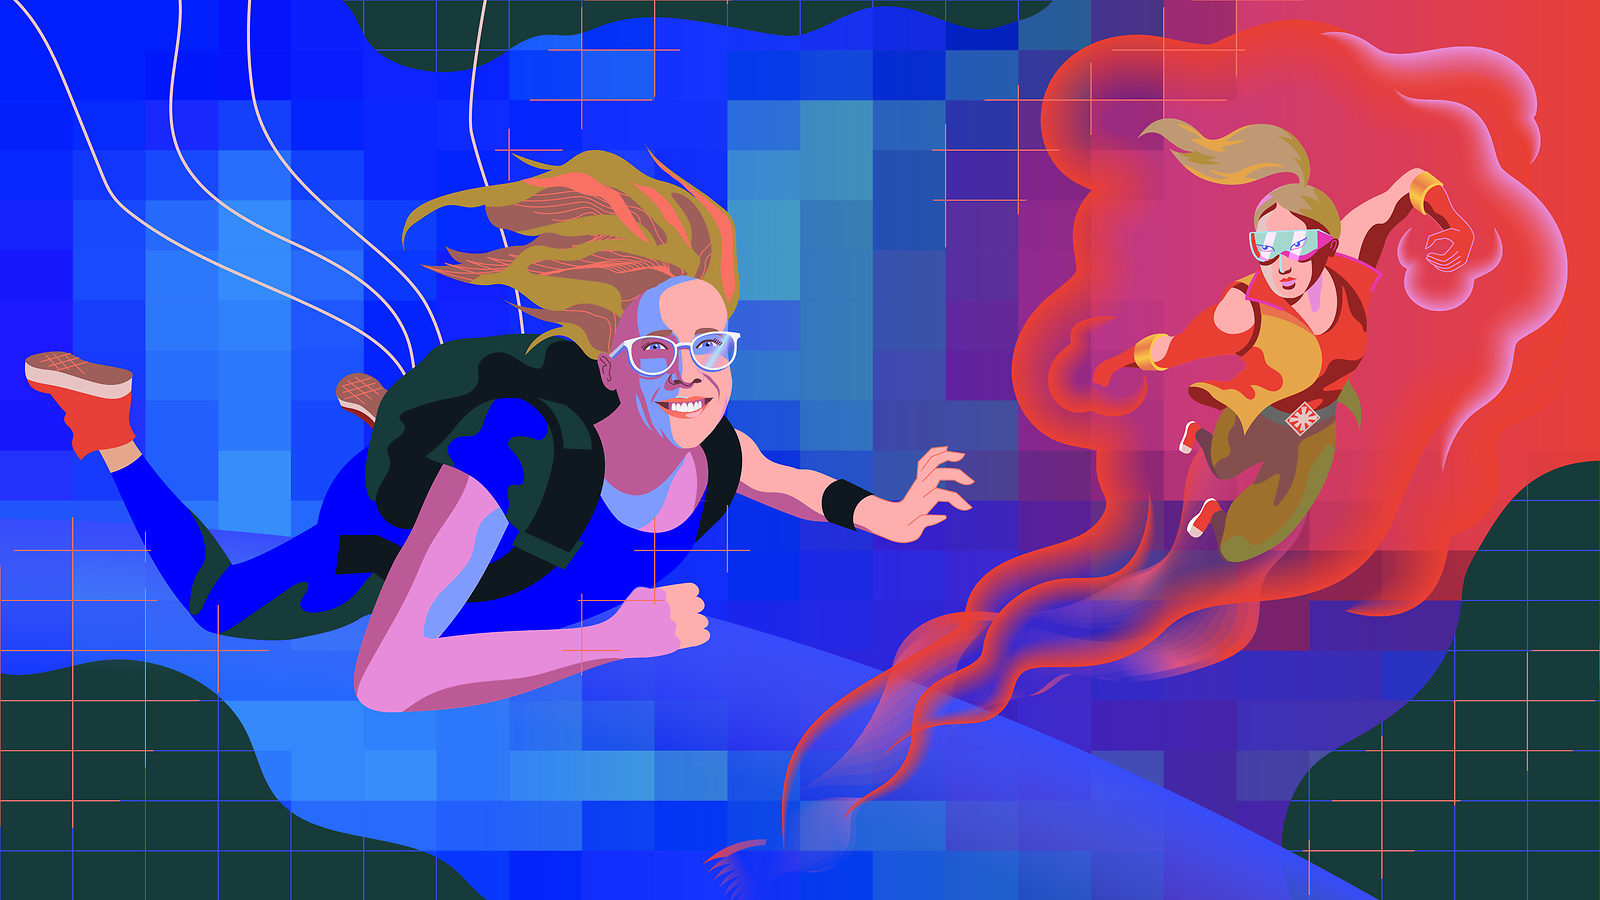 An illustration of Becky Thompson skydiving next to Spectra